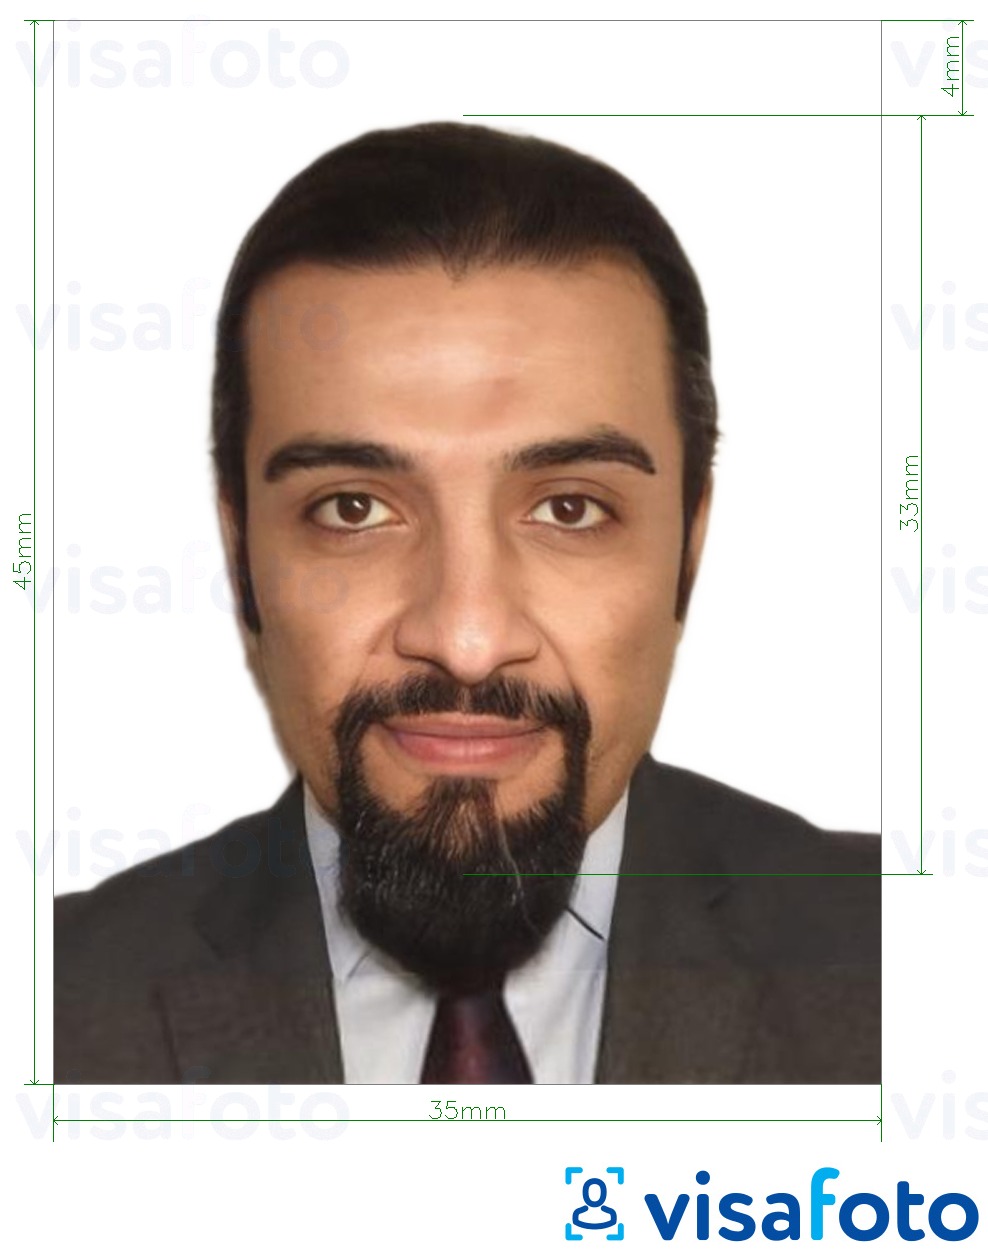 Example of photo for Tunisia passport 3.5x4.5 cm (35x45 mm) with exact size specification